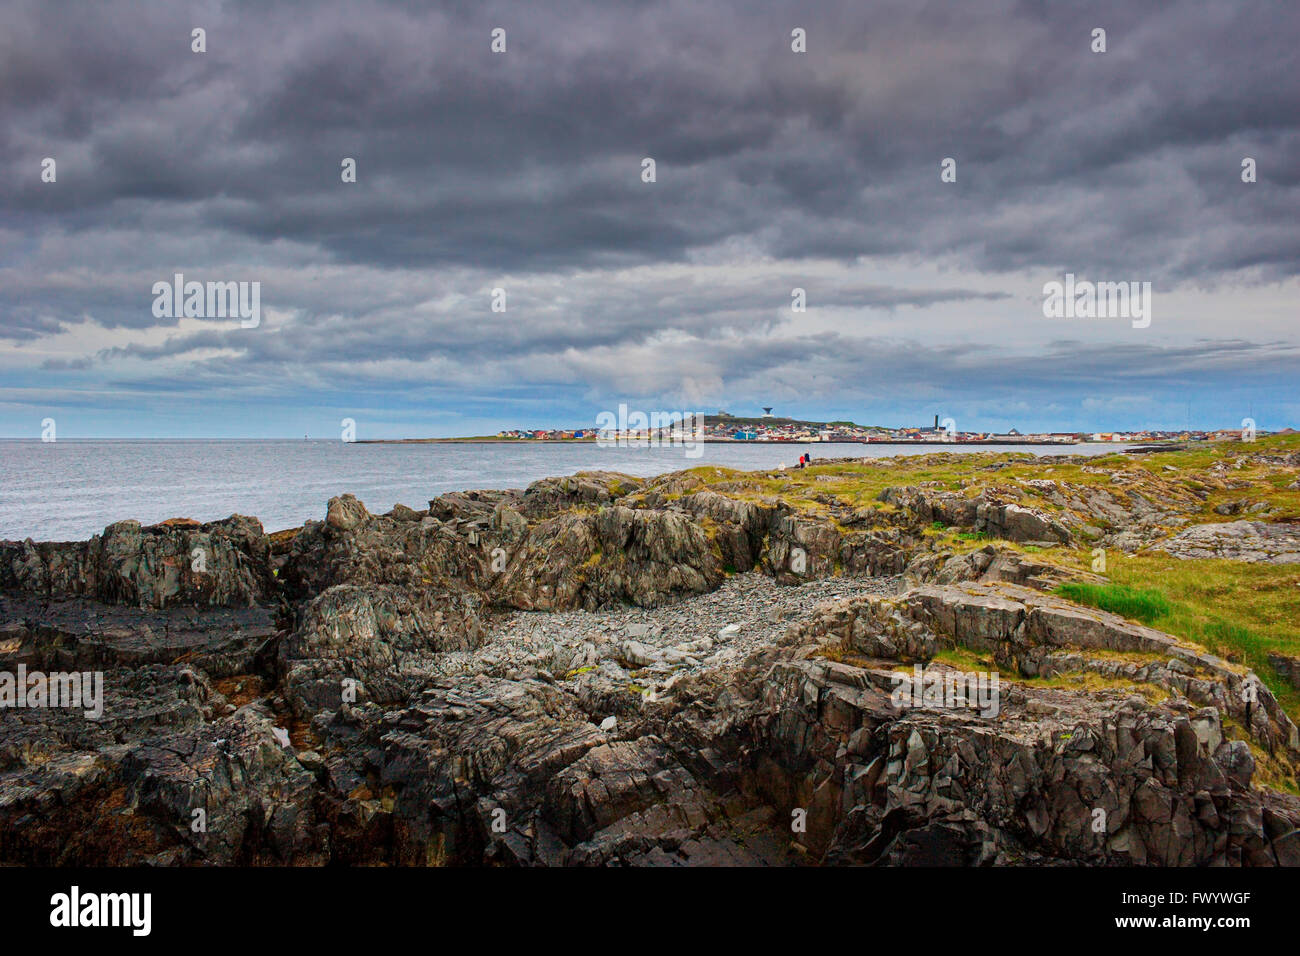 The town Vardø seen from Skagen on a stormy summer day. Varanger region in arctic Norway. Stock Photo